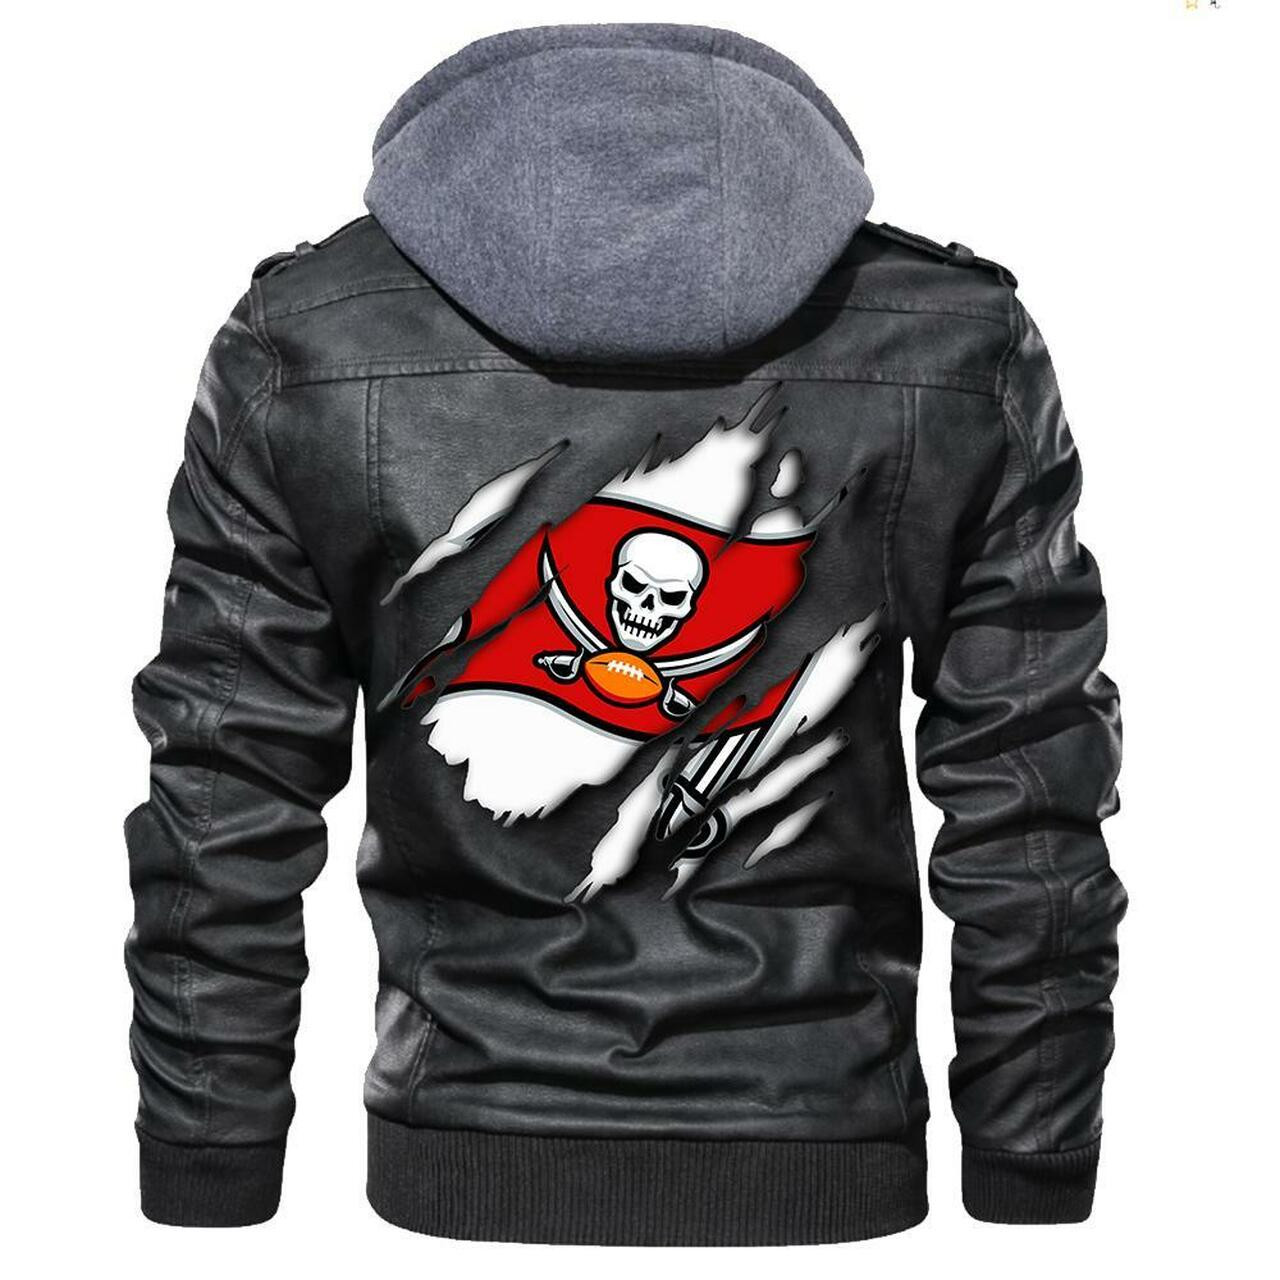 Are you looking for a great leather jacket? 224